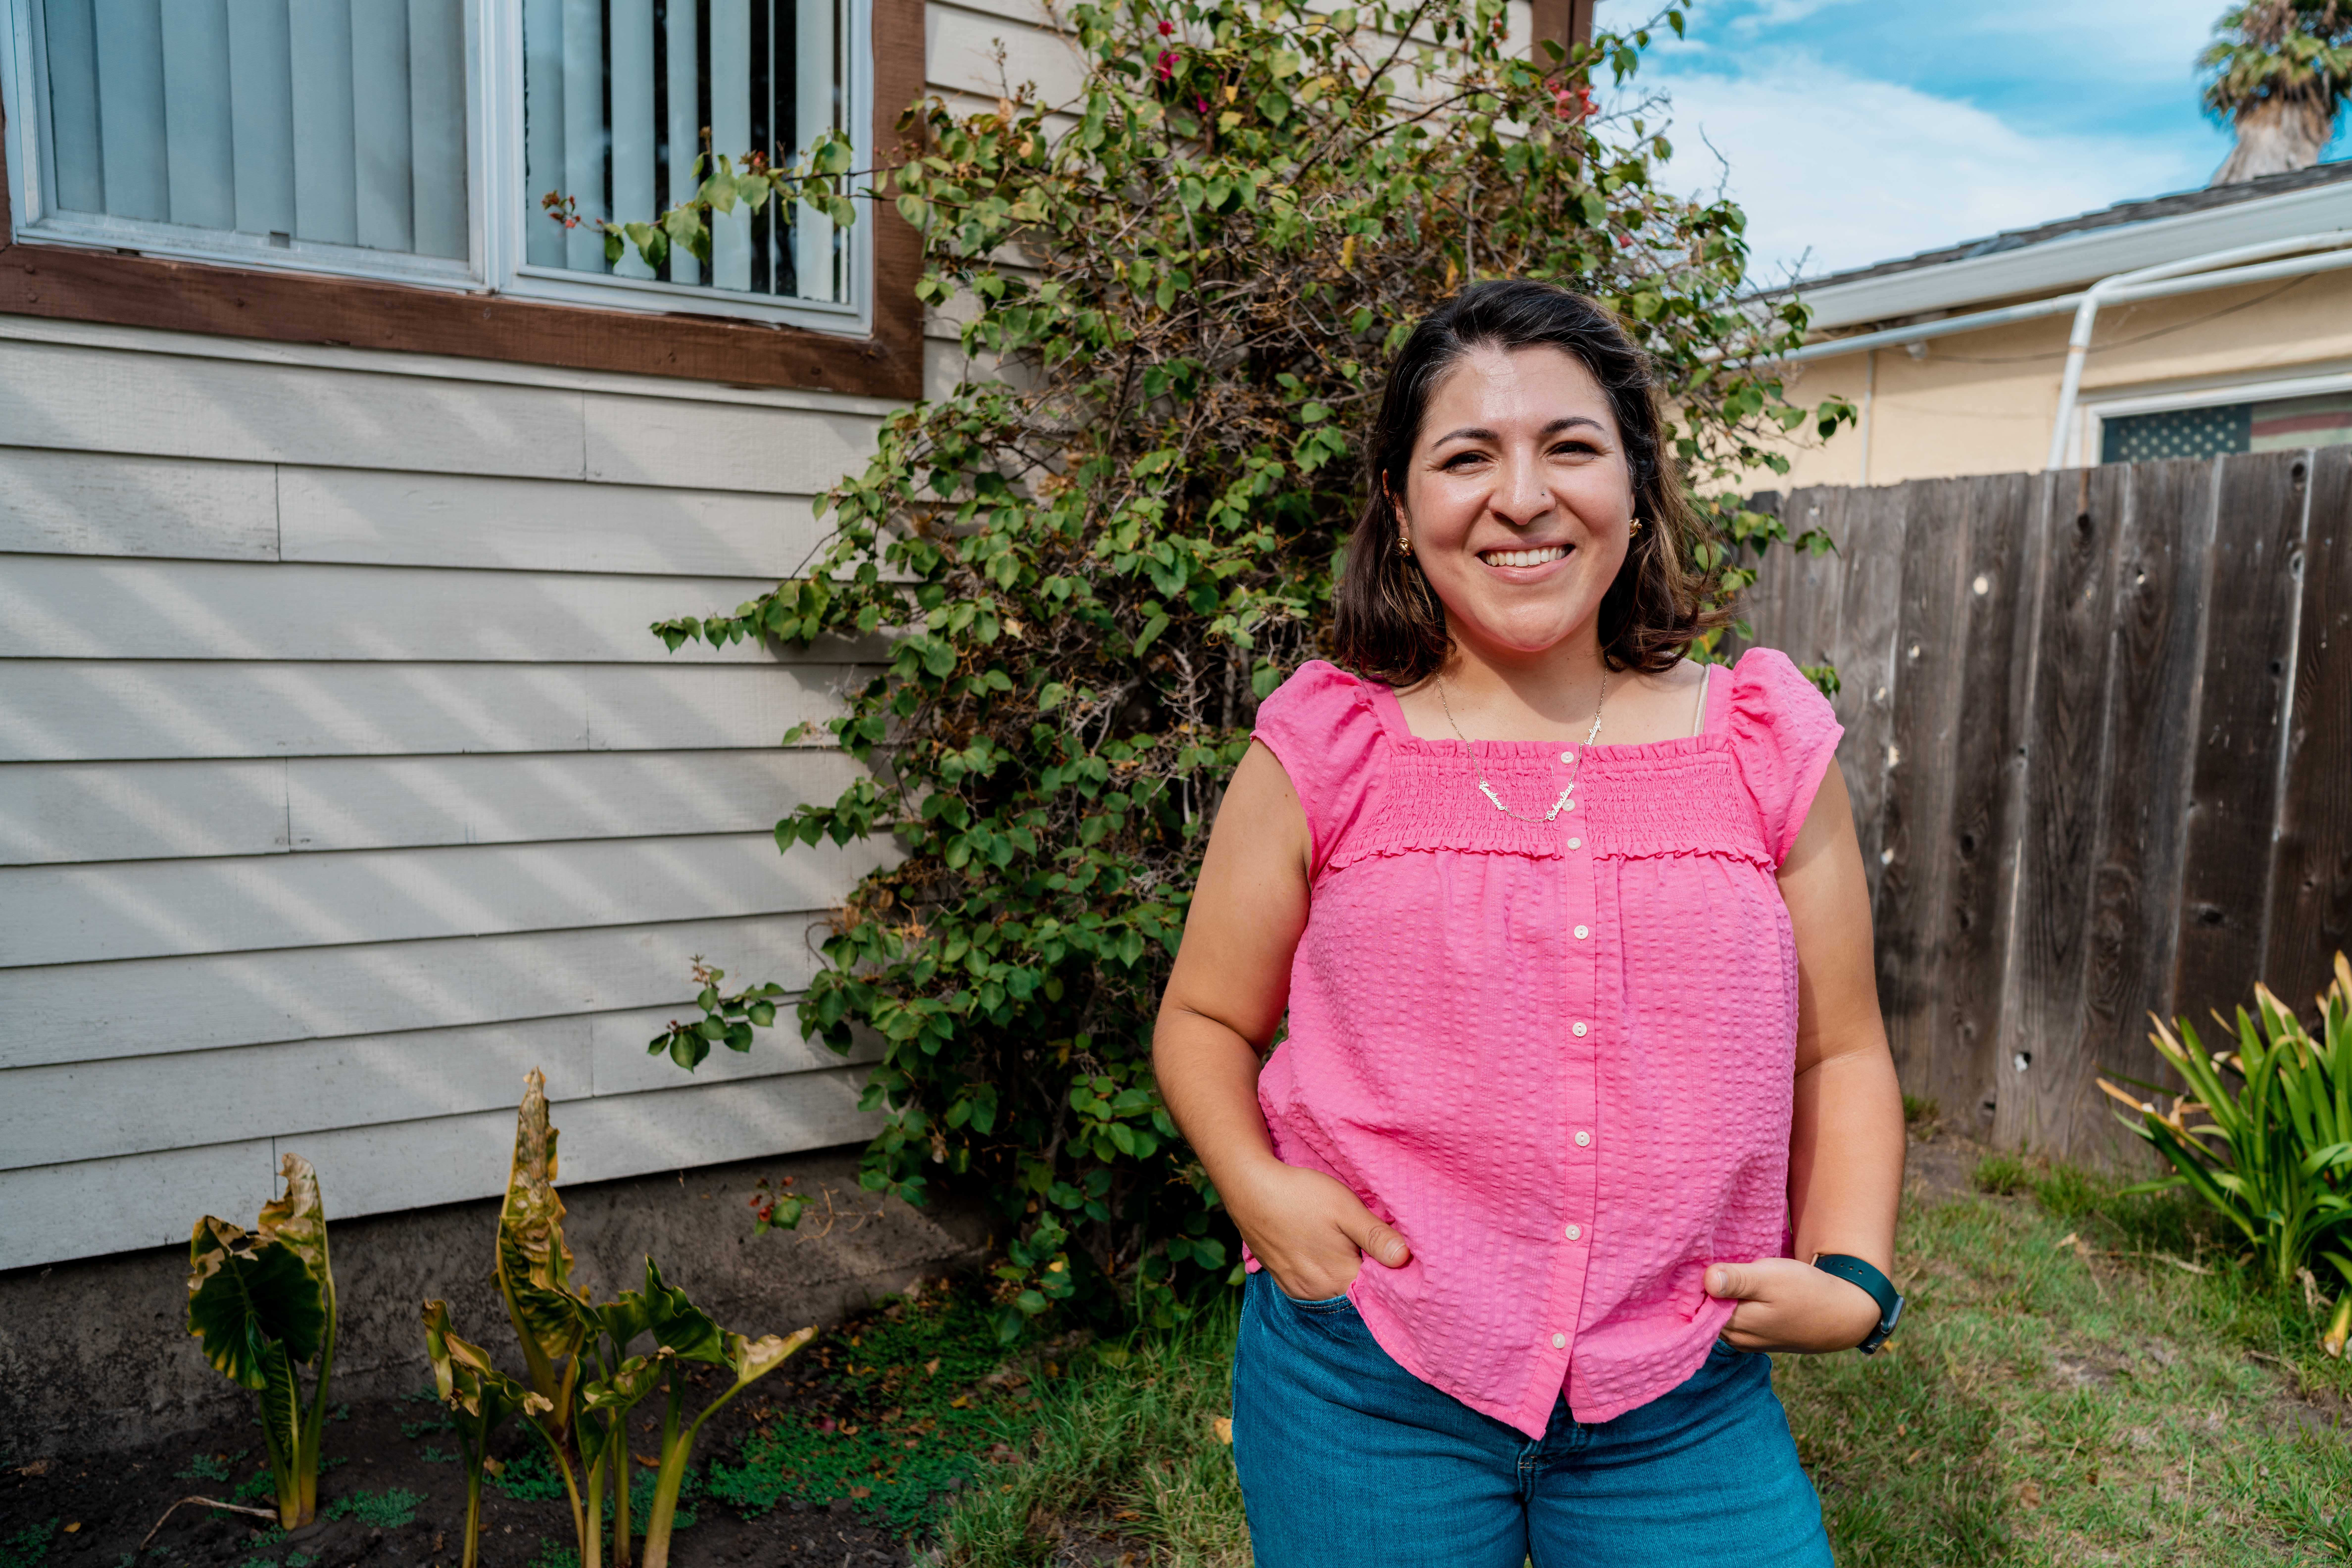 Meet More Neighbors! The People of East Palo Alto Series Updated